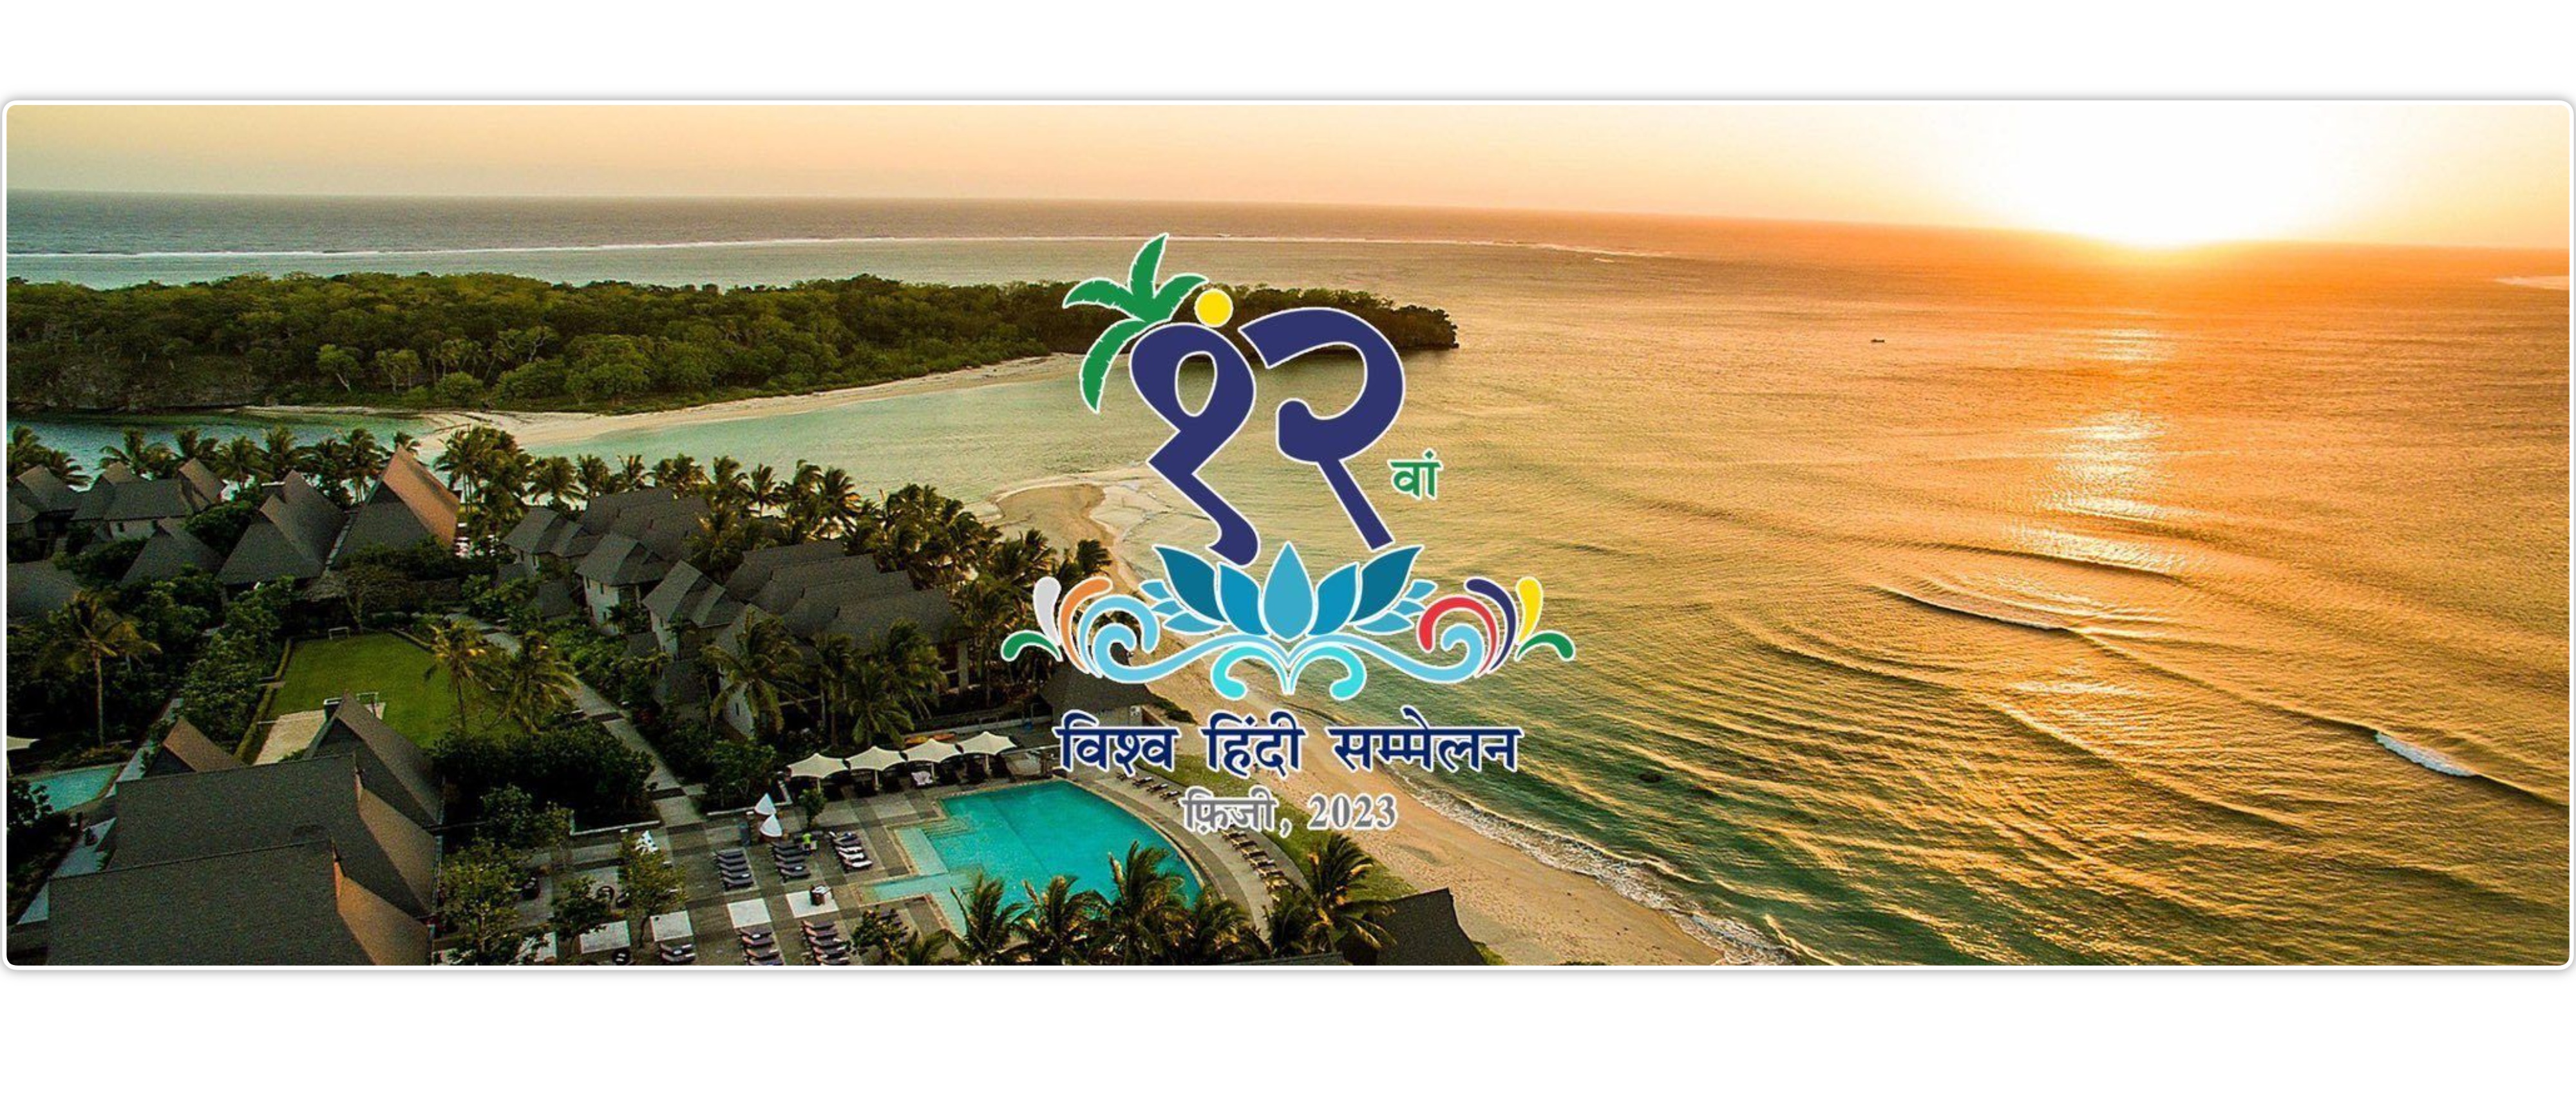  12th World Hindi Conference is being organized in Fiji from 15-17 February 2023
